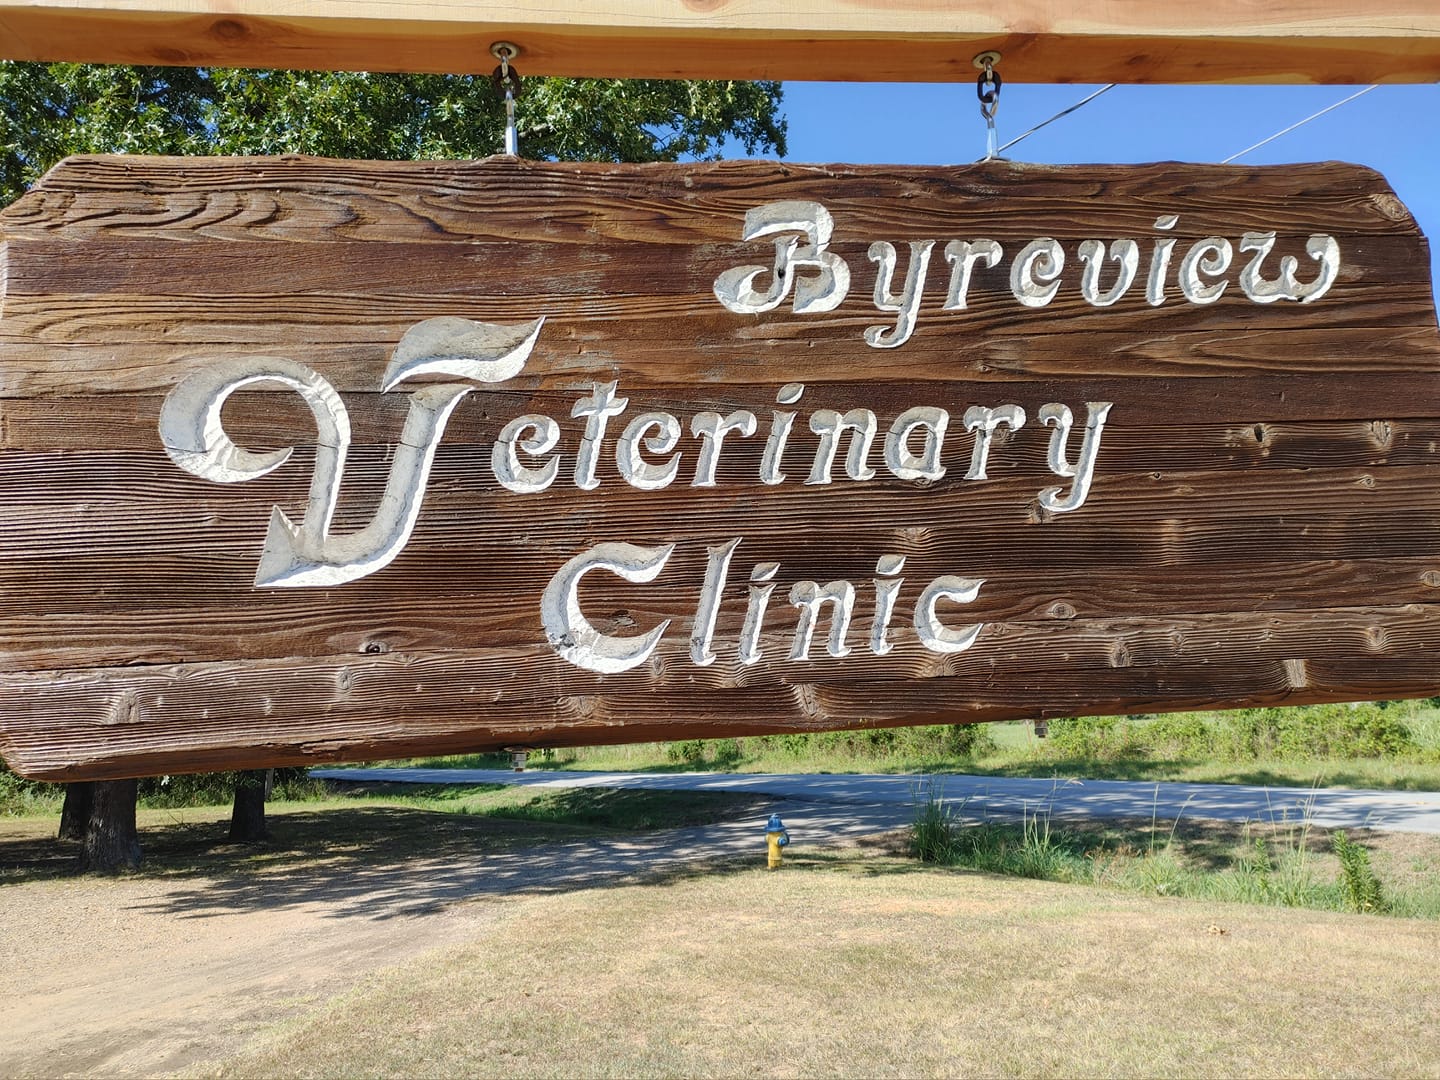 Byreview Veterinary Clinic